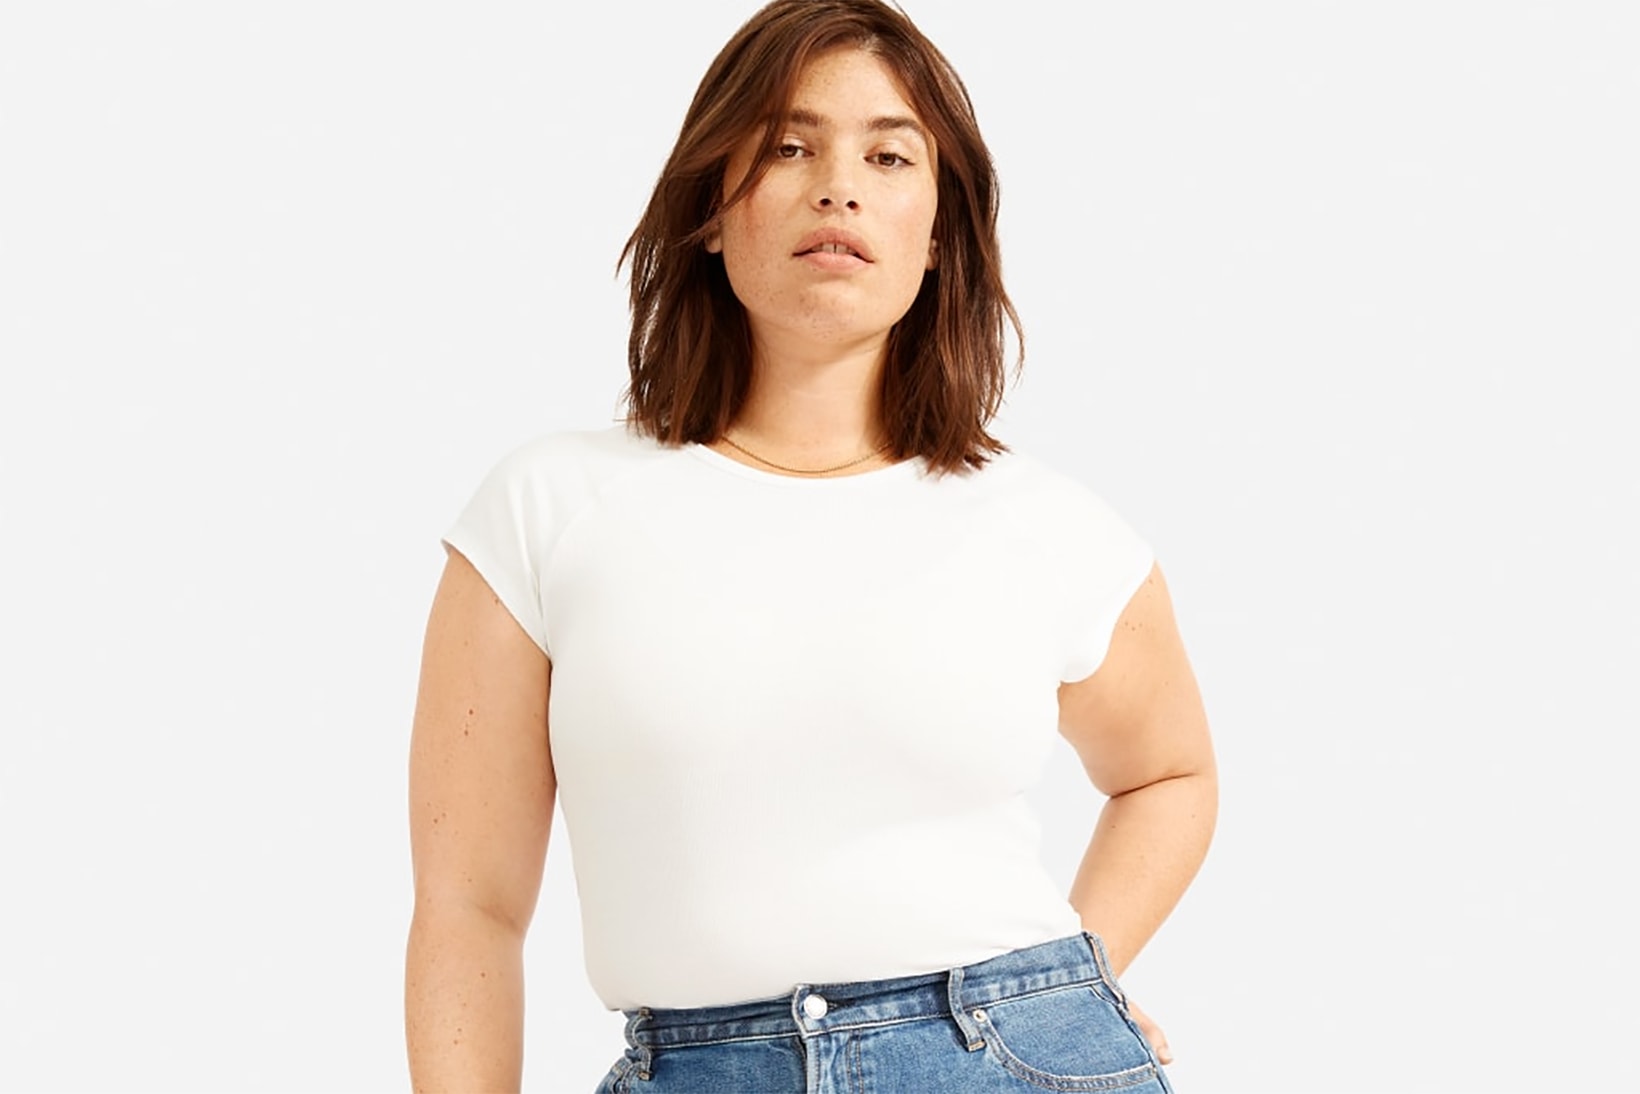 Everlane to Change All Cotton to Organic by 2023